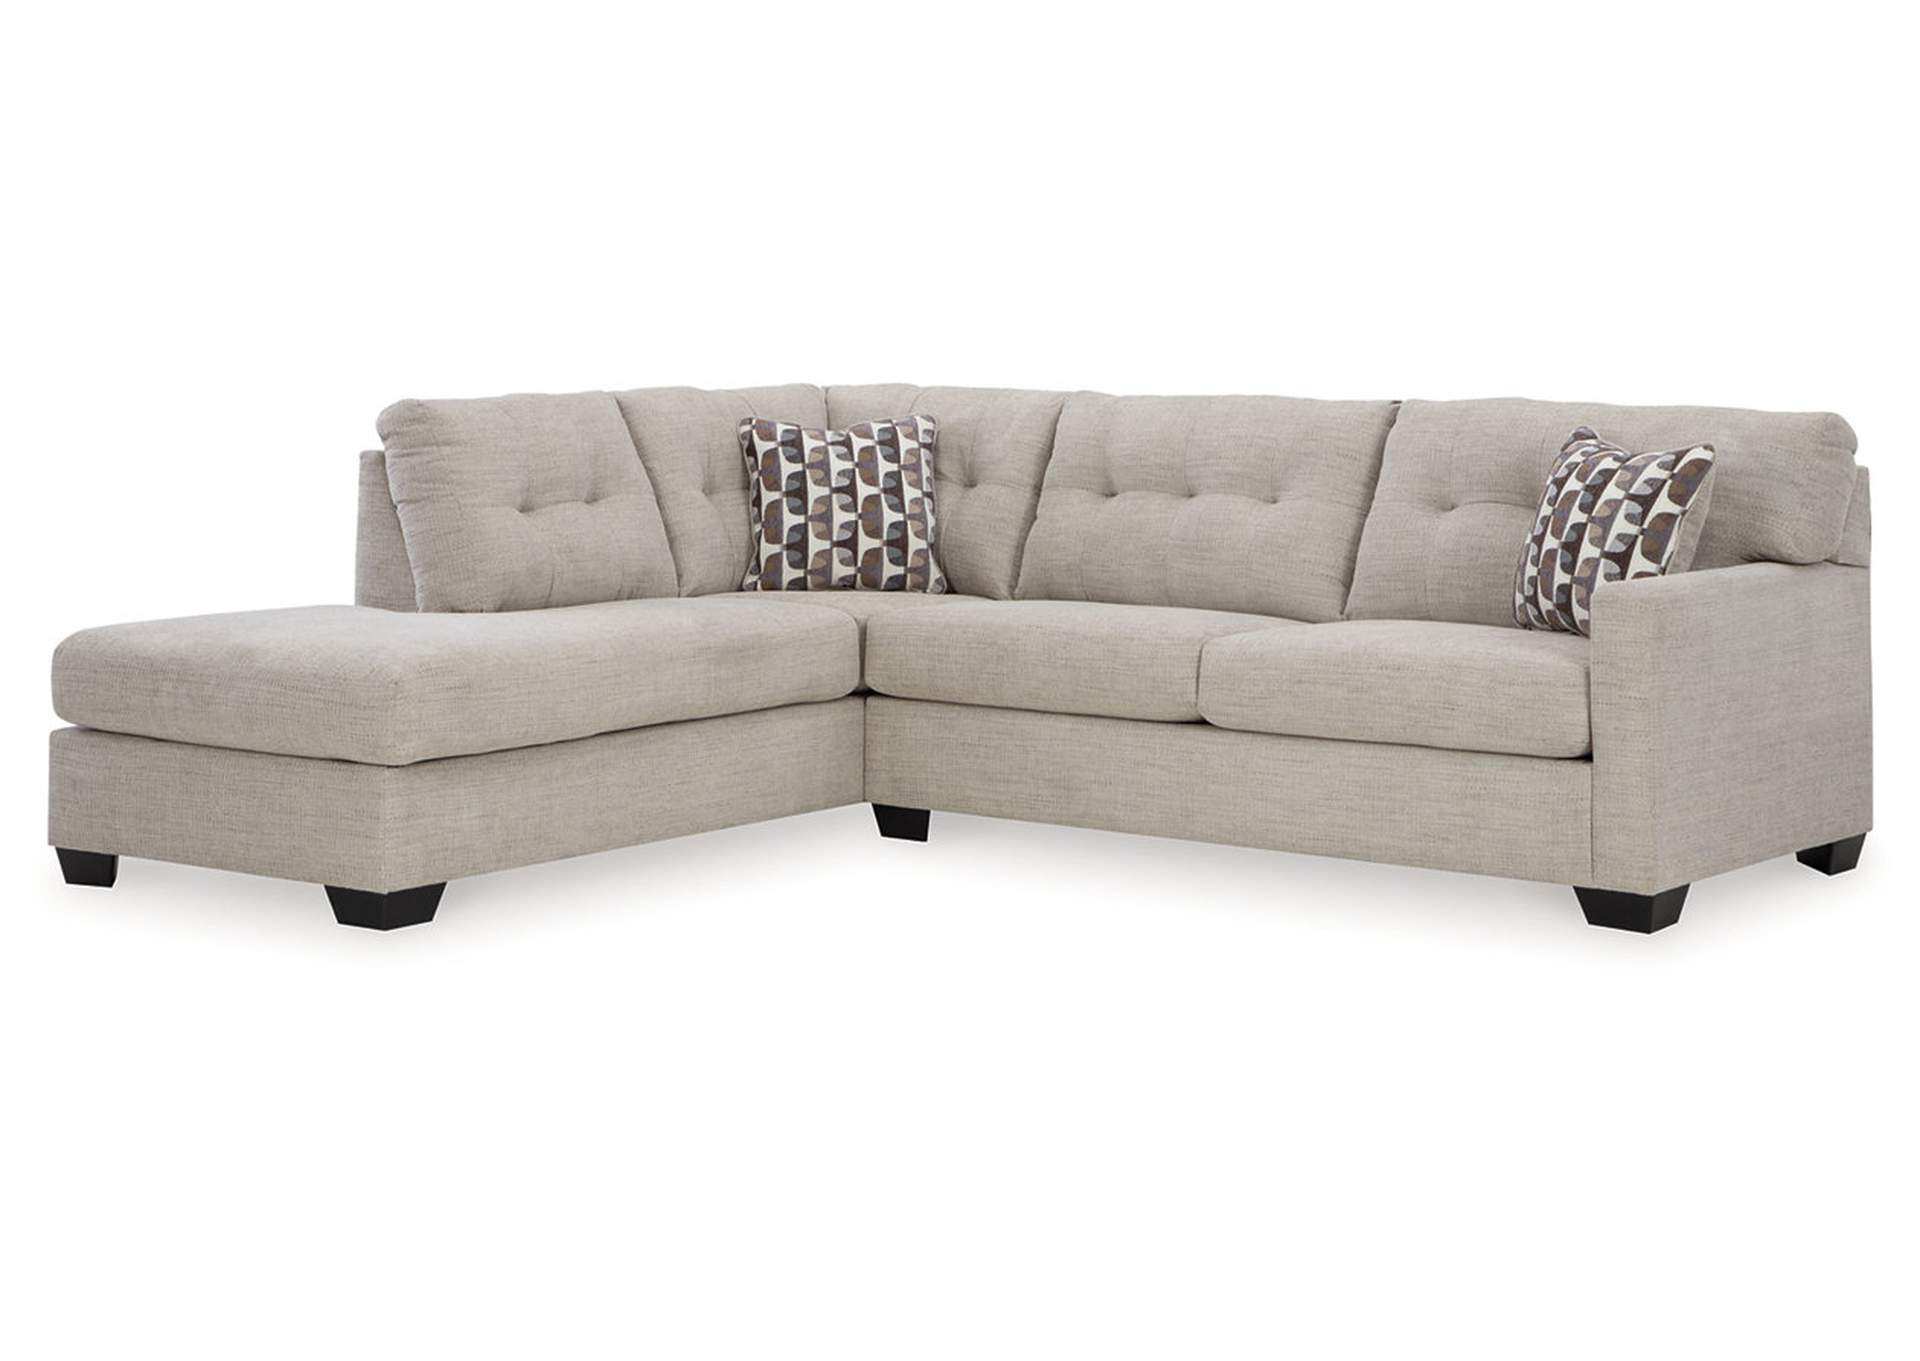 Mahoney 2-Piece Sleeper Sectional with Chaise,Signature Design By Ashley